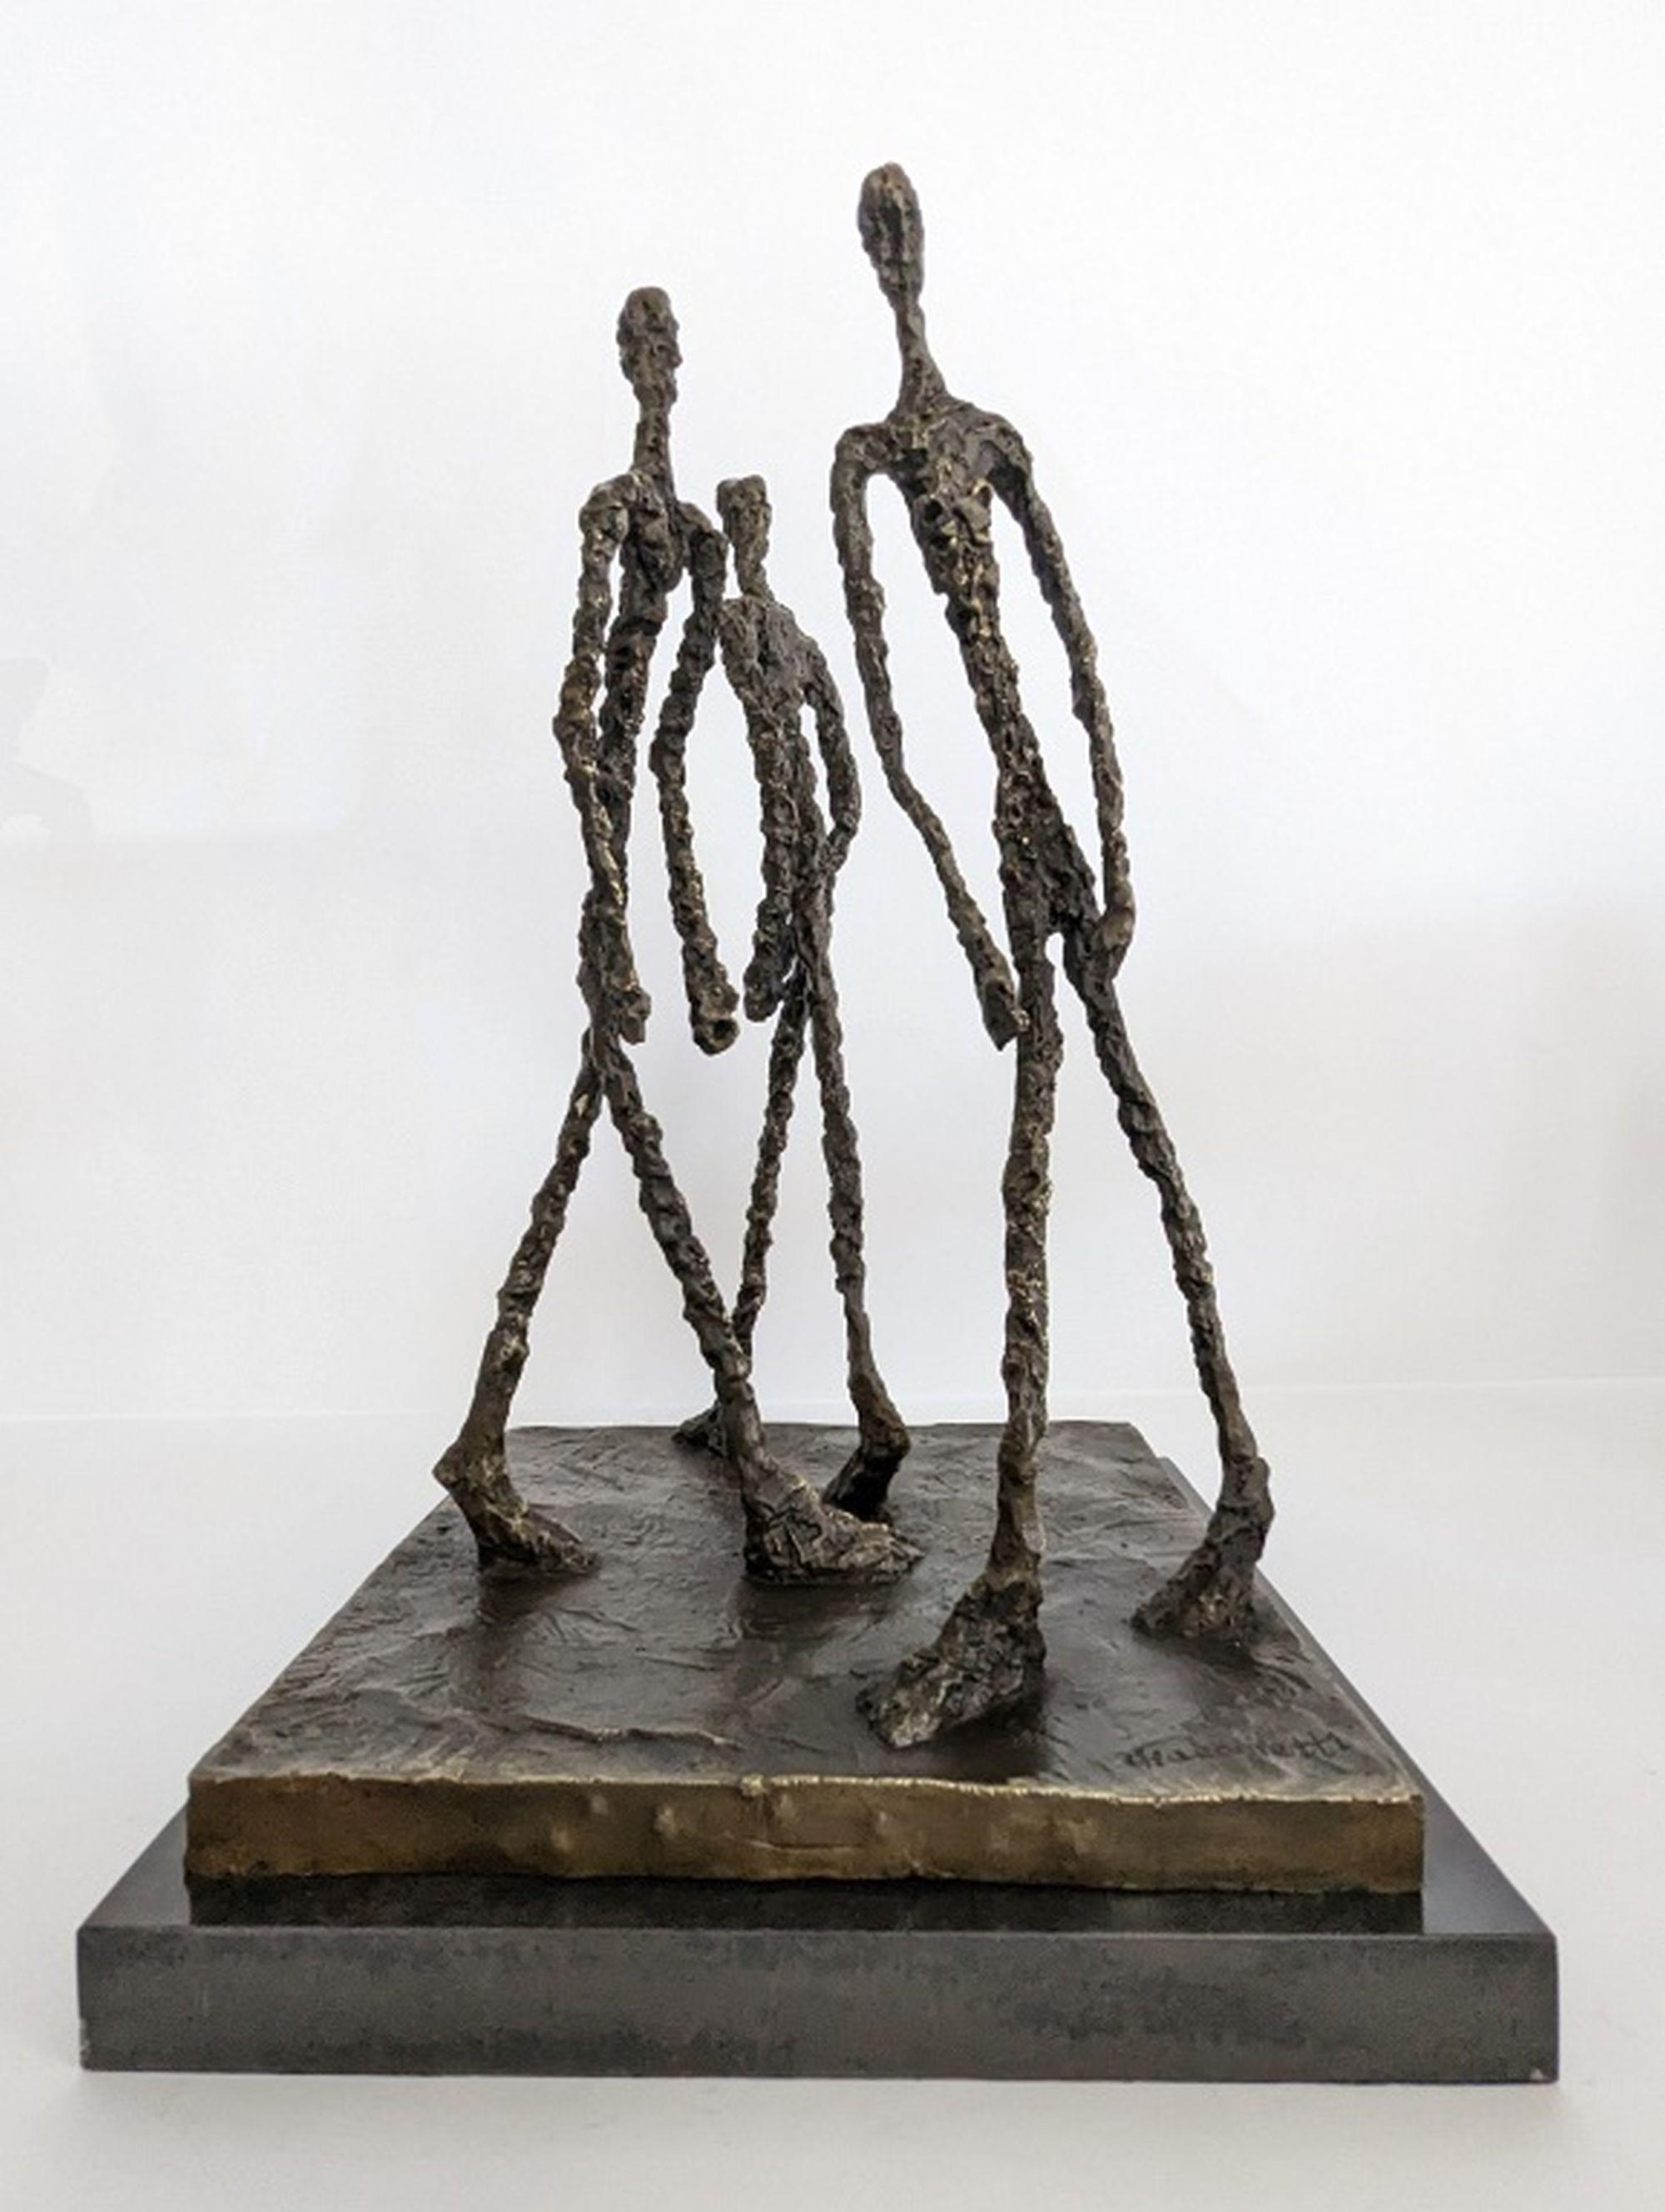 Artwork by Alberto Giacometti, Three Men Walking, Made of Bronze with applied patina on marble base